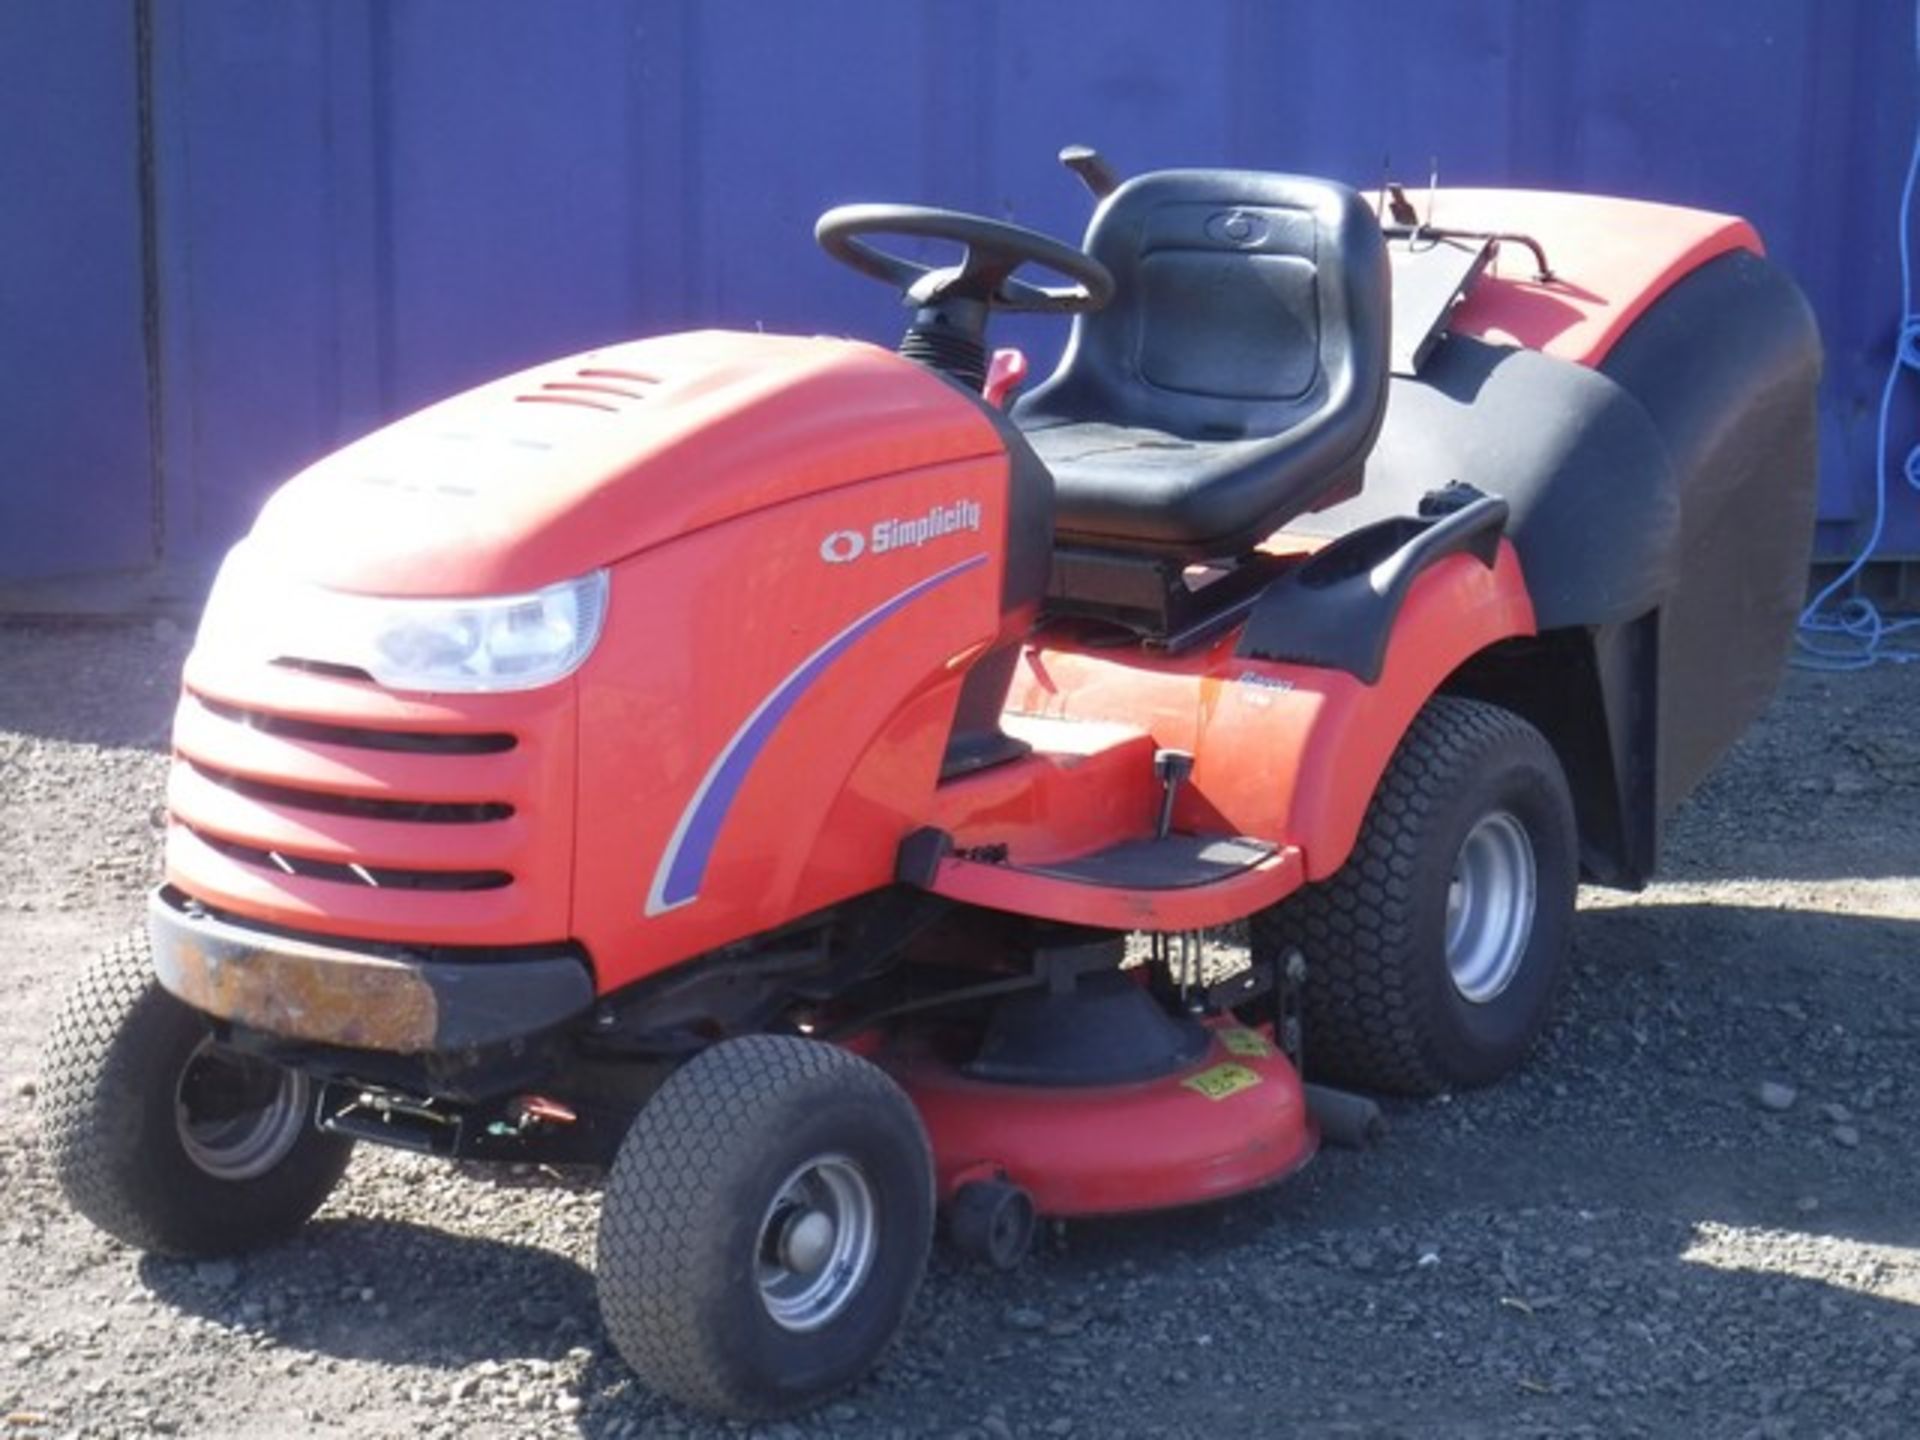 SIMPLICITY 2003 RIDE ON MOWER BARON 18HP, BRIGGS AND STRATTON ENGINE 508.0 HOURS